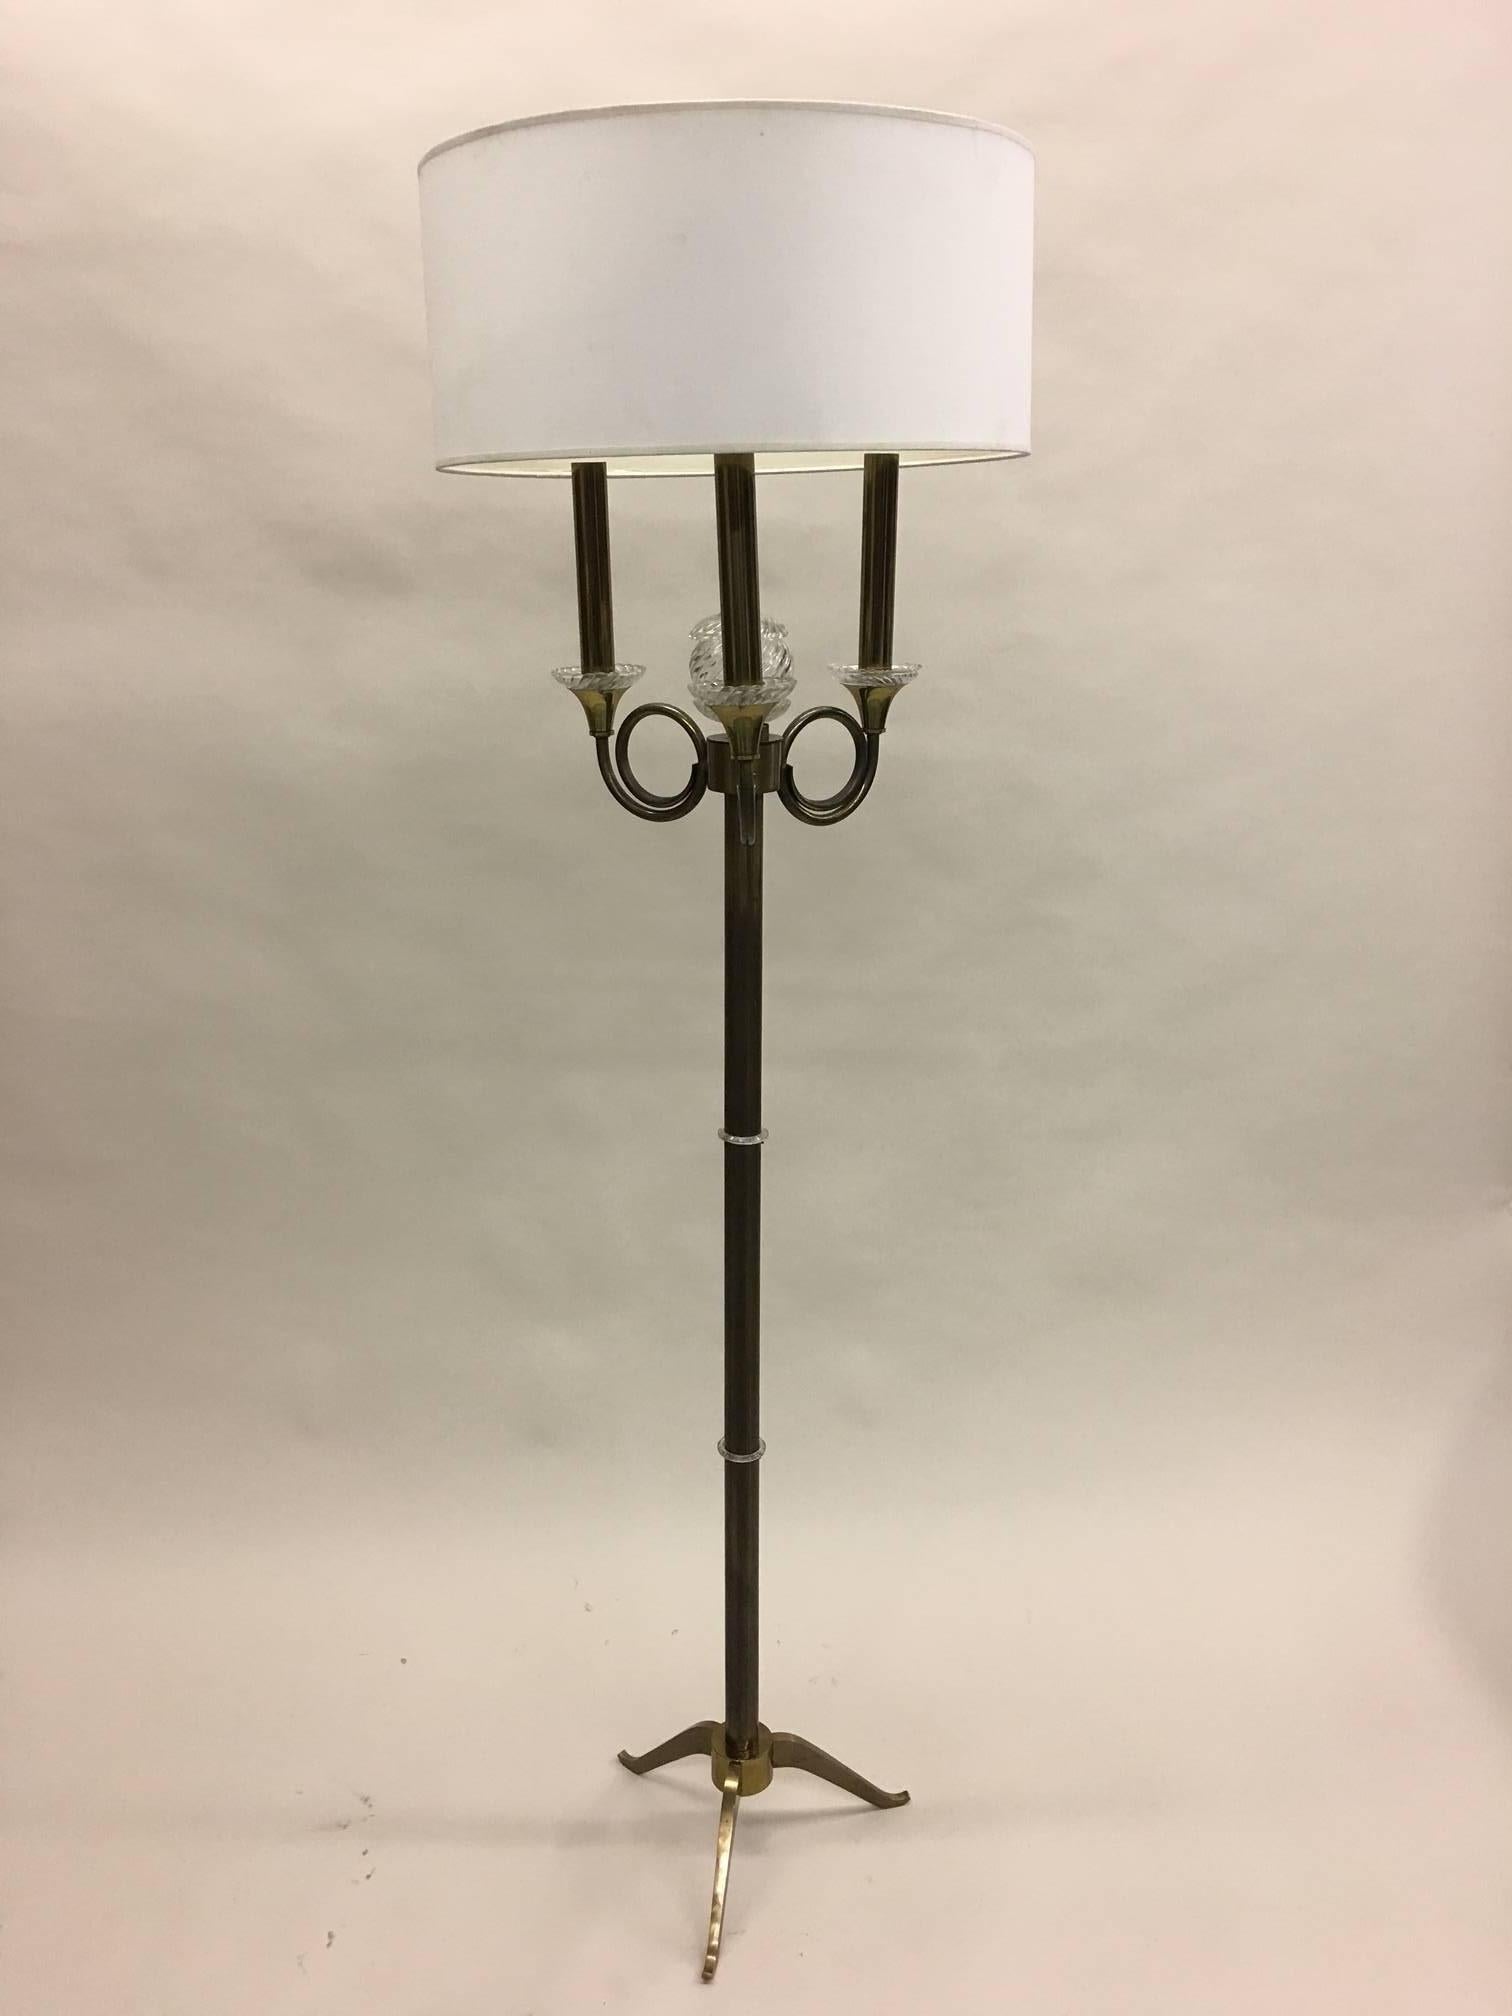 Elegant and timeless pair of French Mid-Century Modern floor lamps by Jules Leleu in solid brass with bronze patina and crystal detailing. The pieces are highlighted with crystal rings around the central column culminating in a crystal or glass ball